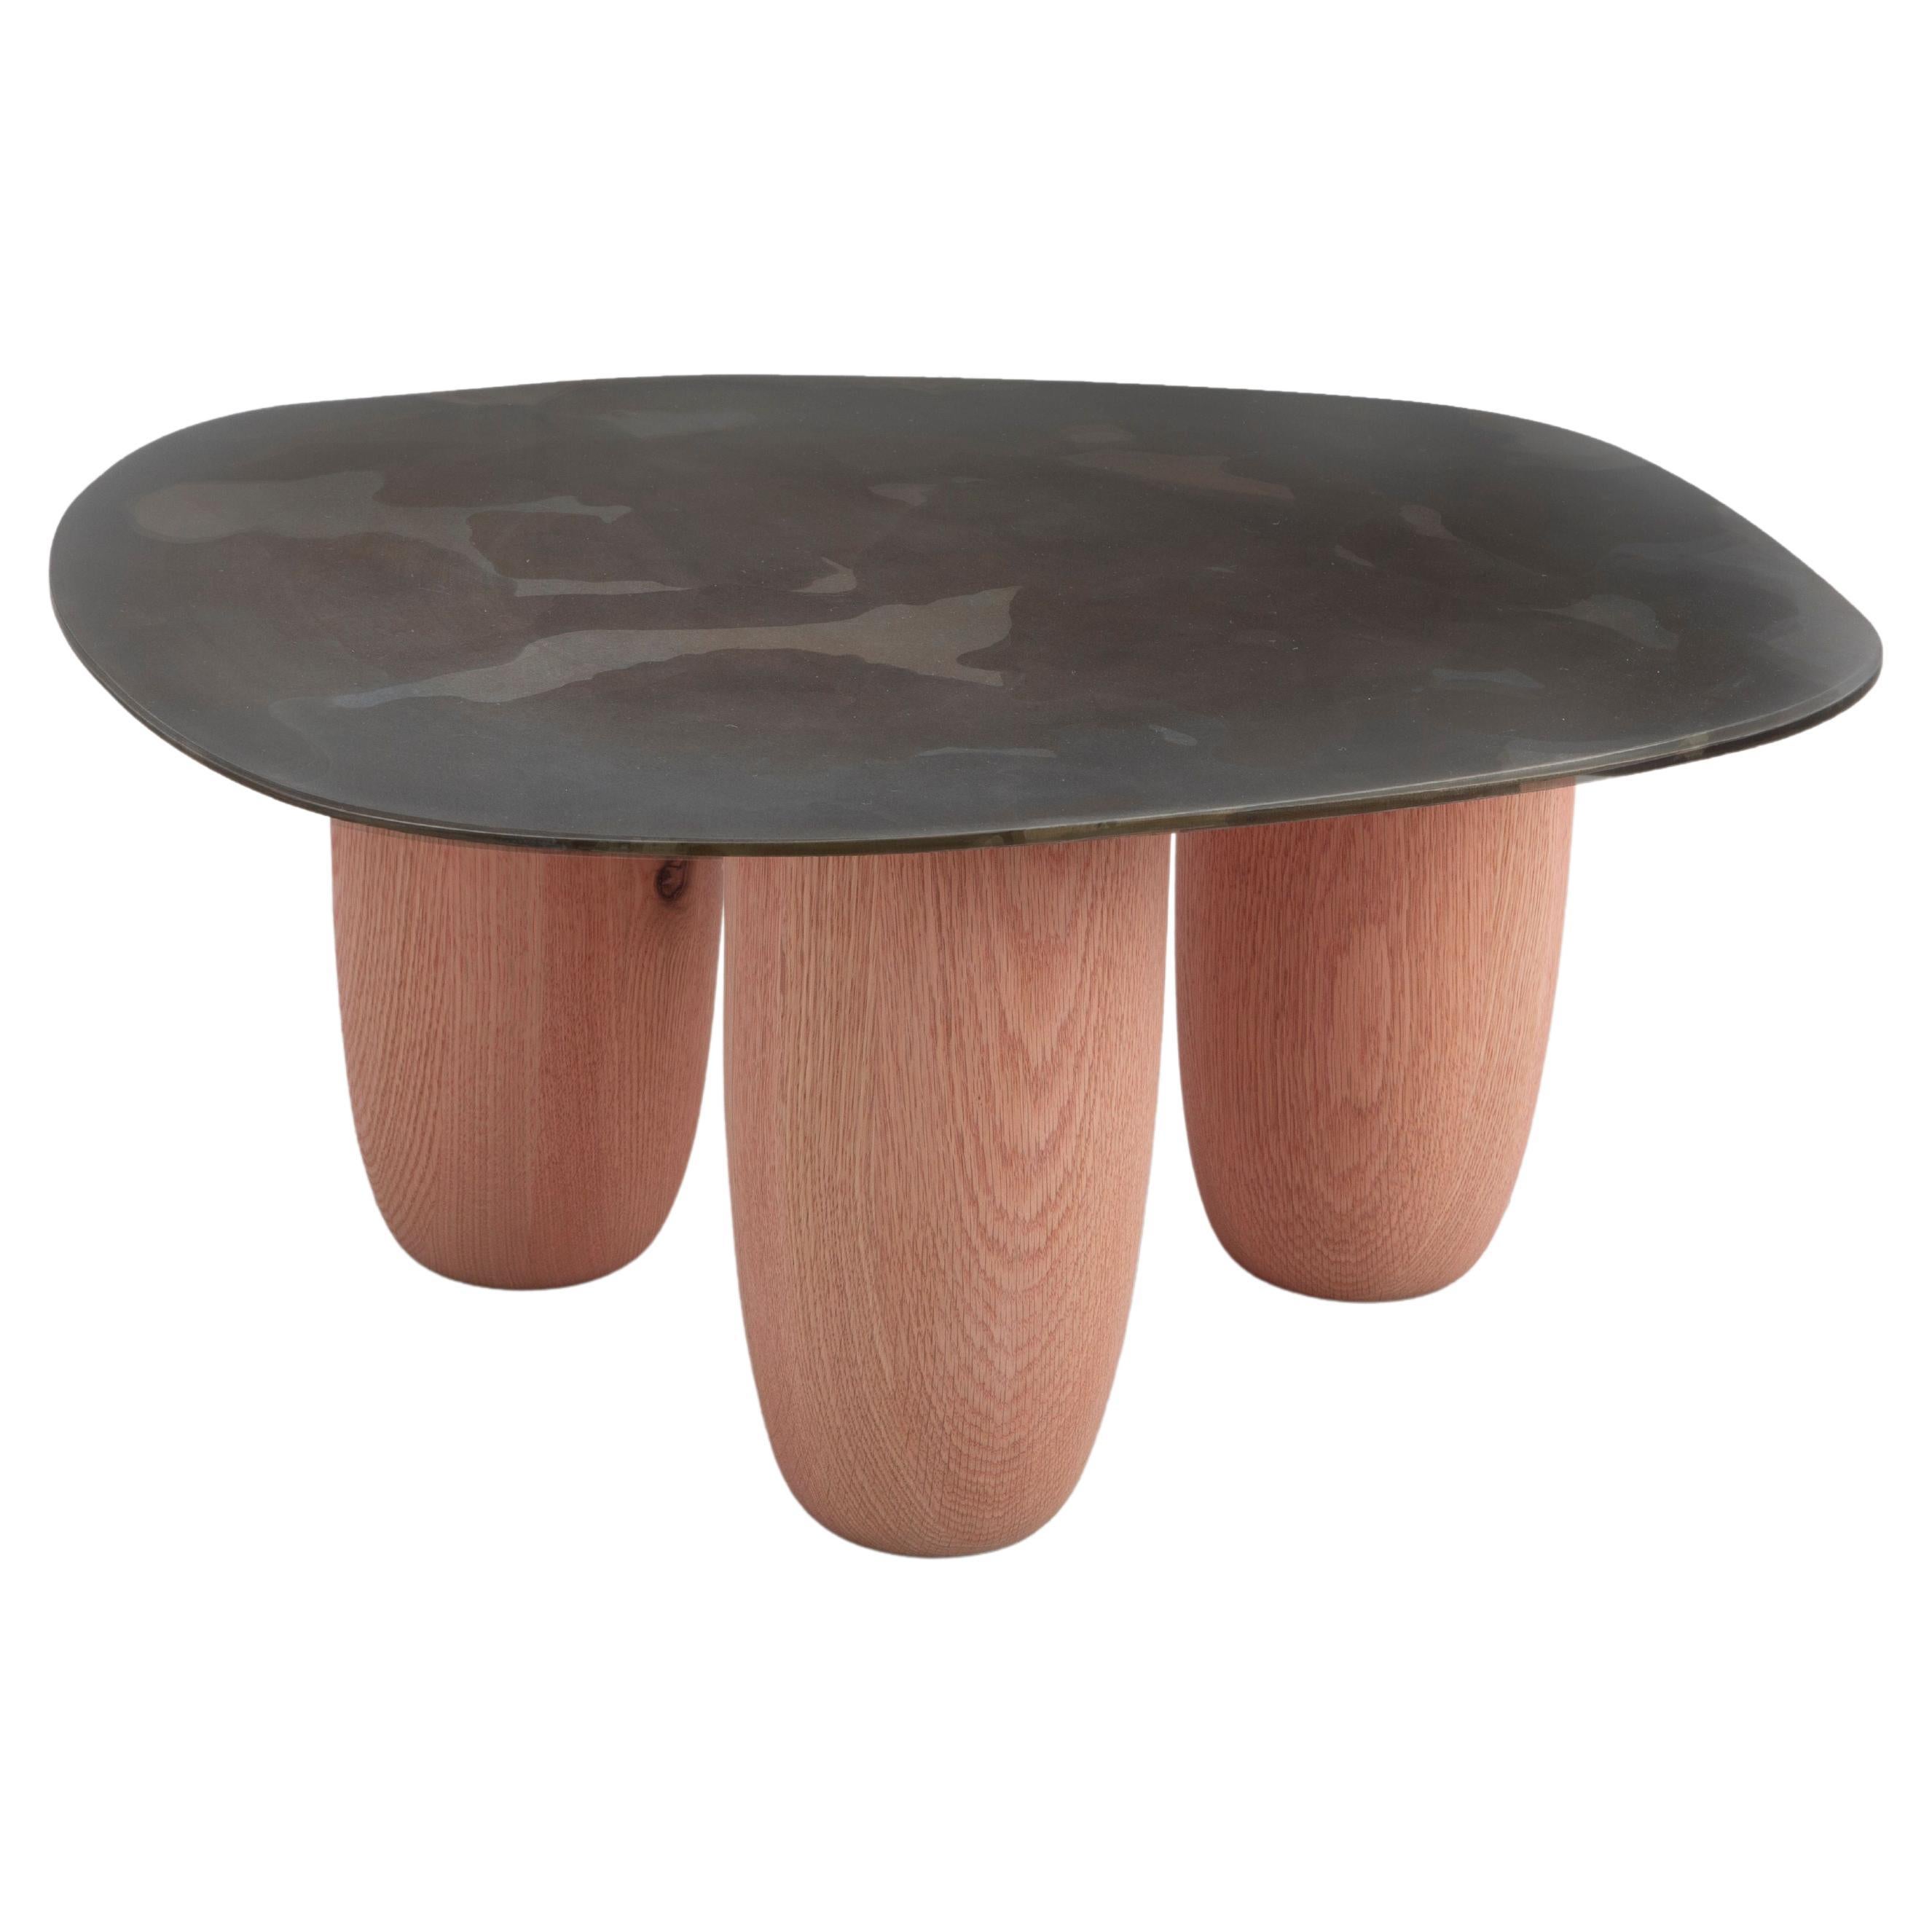 Small Contemporary Steel and Solid Oak Low Sumo Table by Vivian Carbonell For Sale